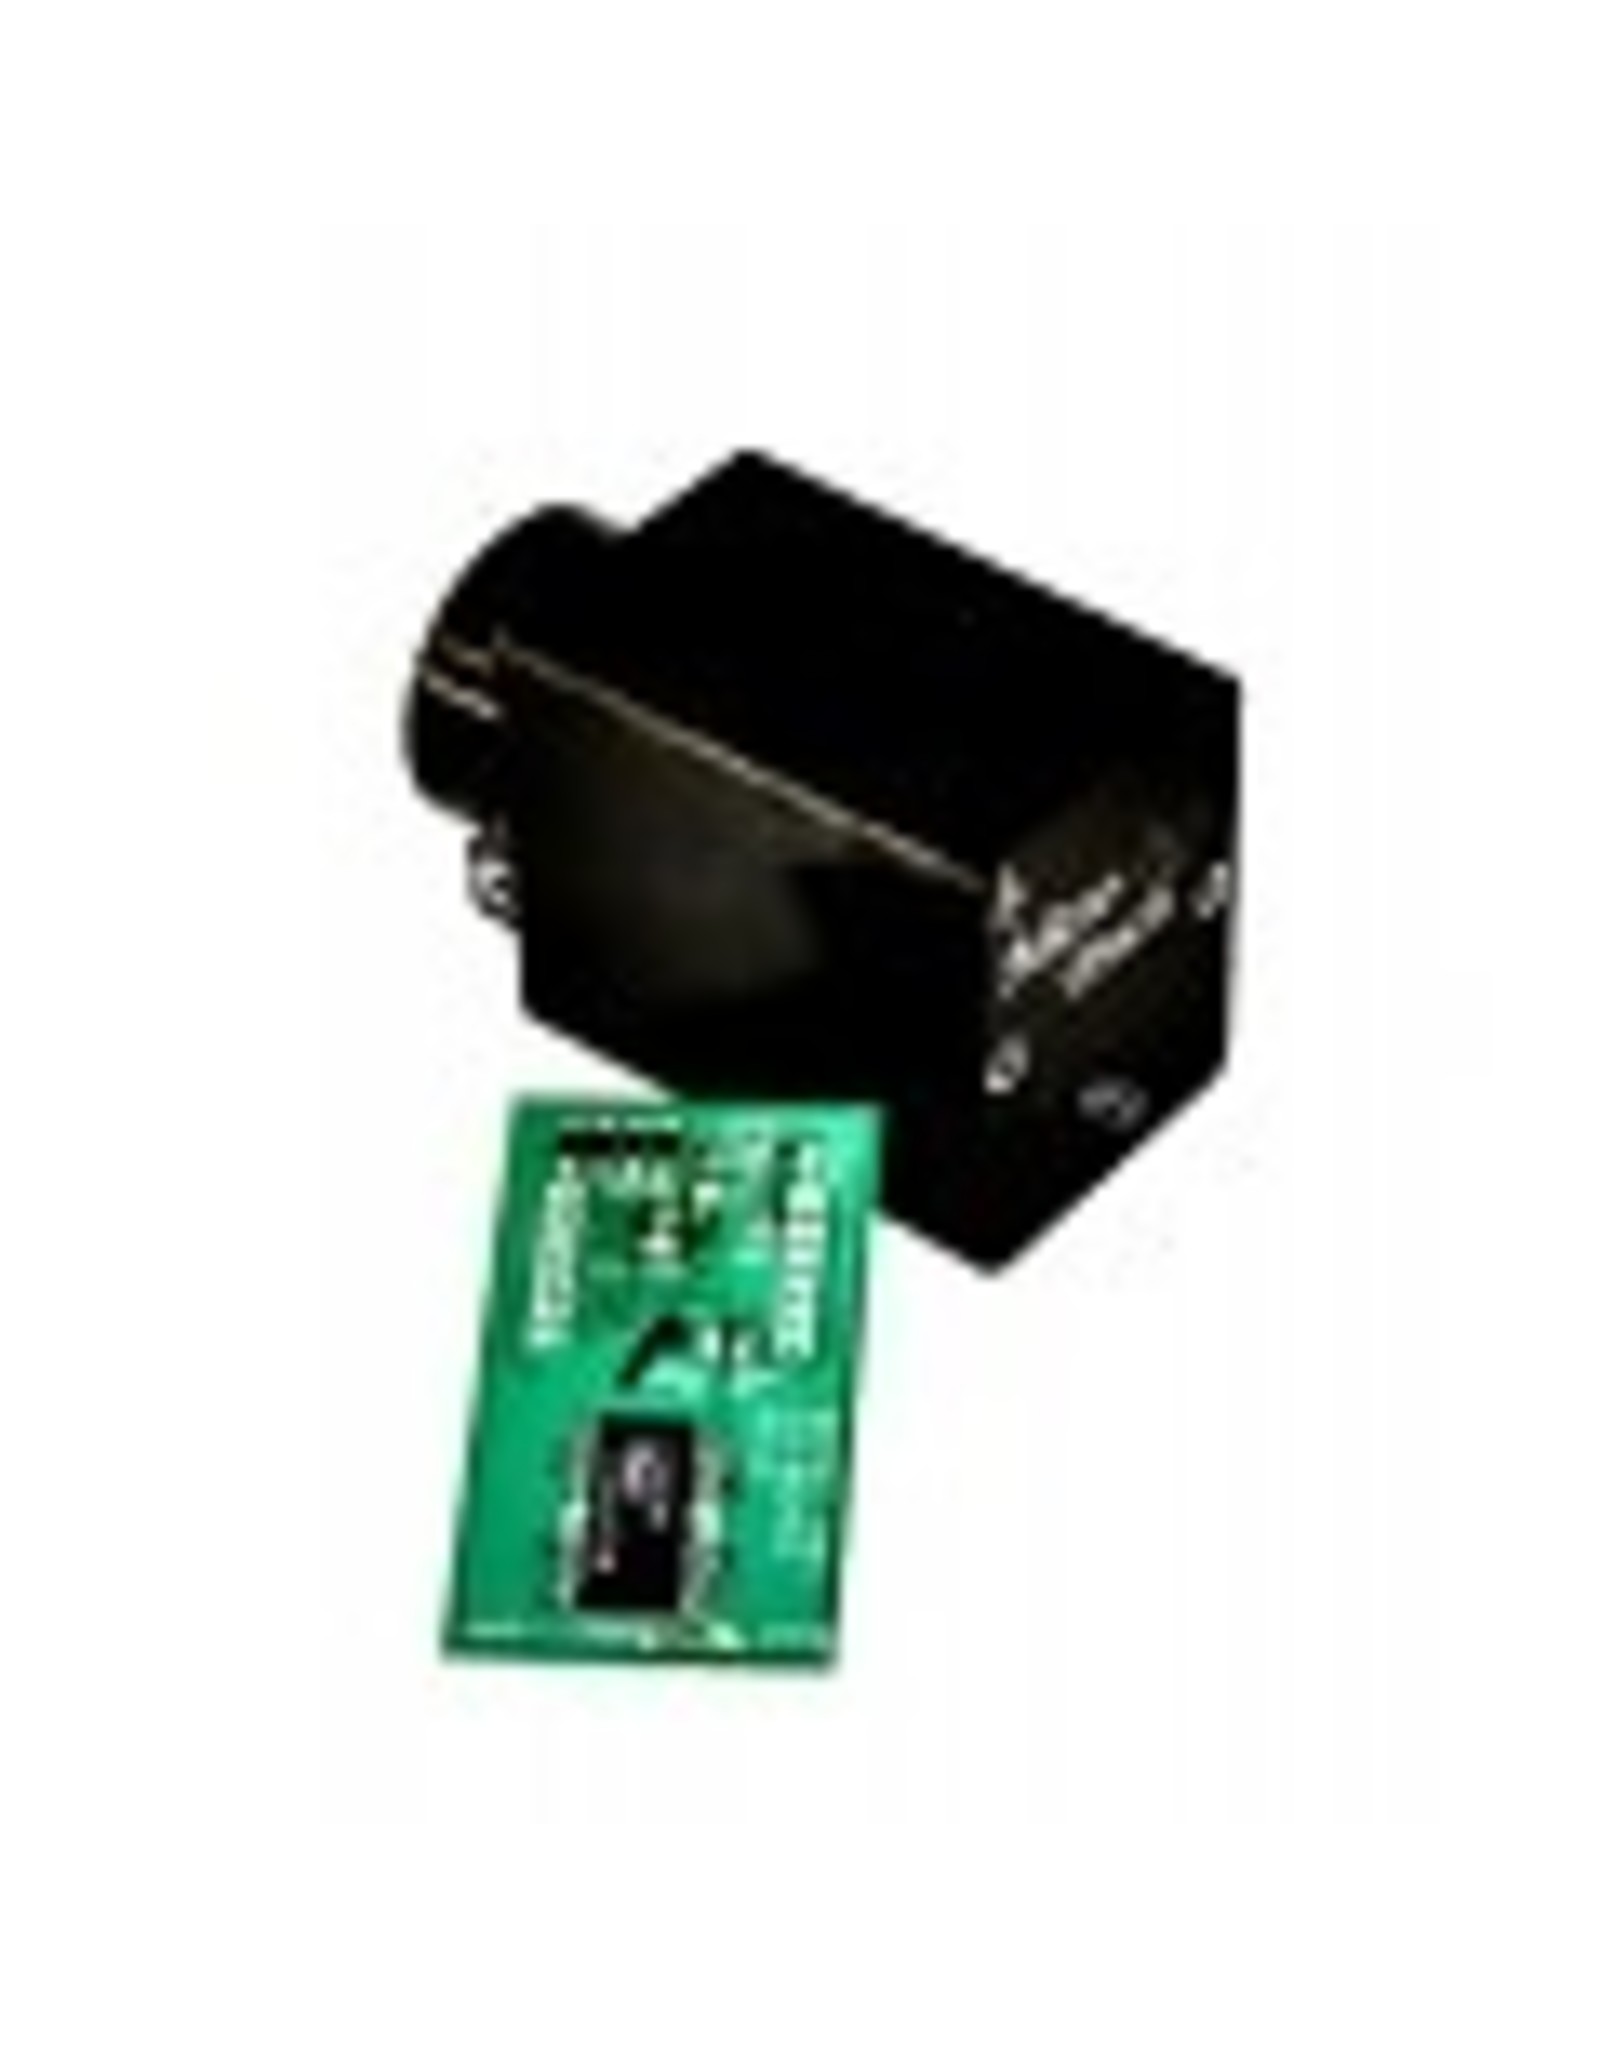 Feathertouch Feathertouch FB-II 2nd FOCUSER--Circuit board upgrade for controlling 2 focusers at the same time